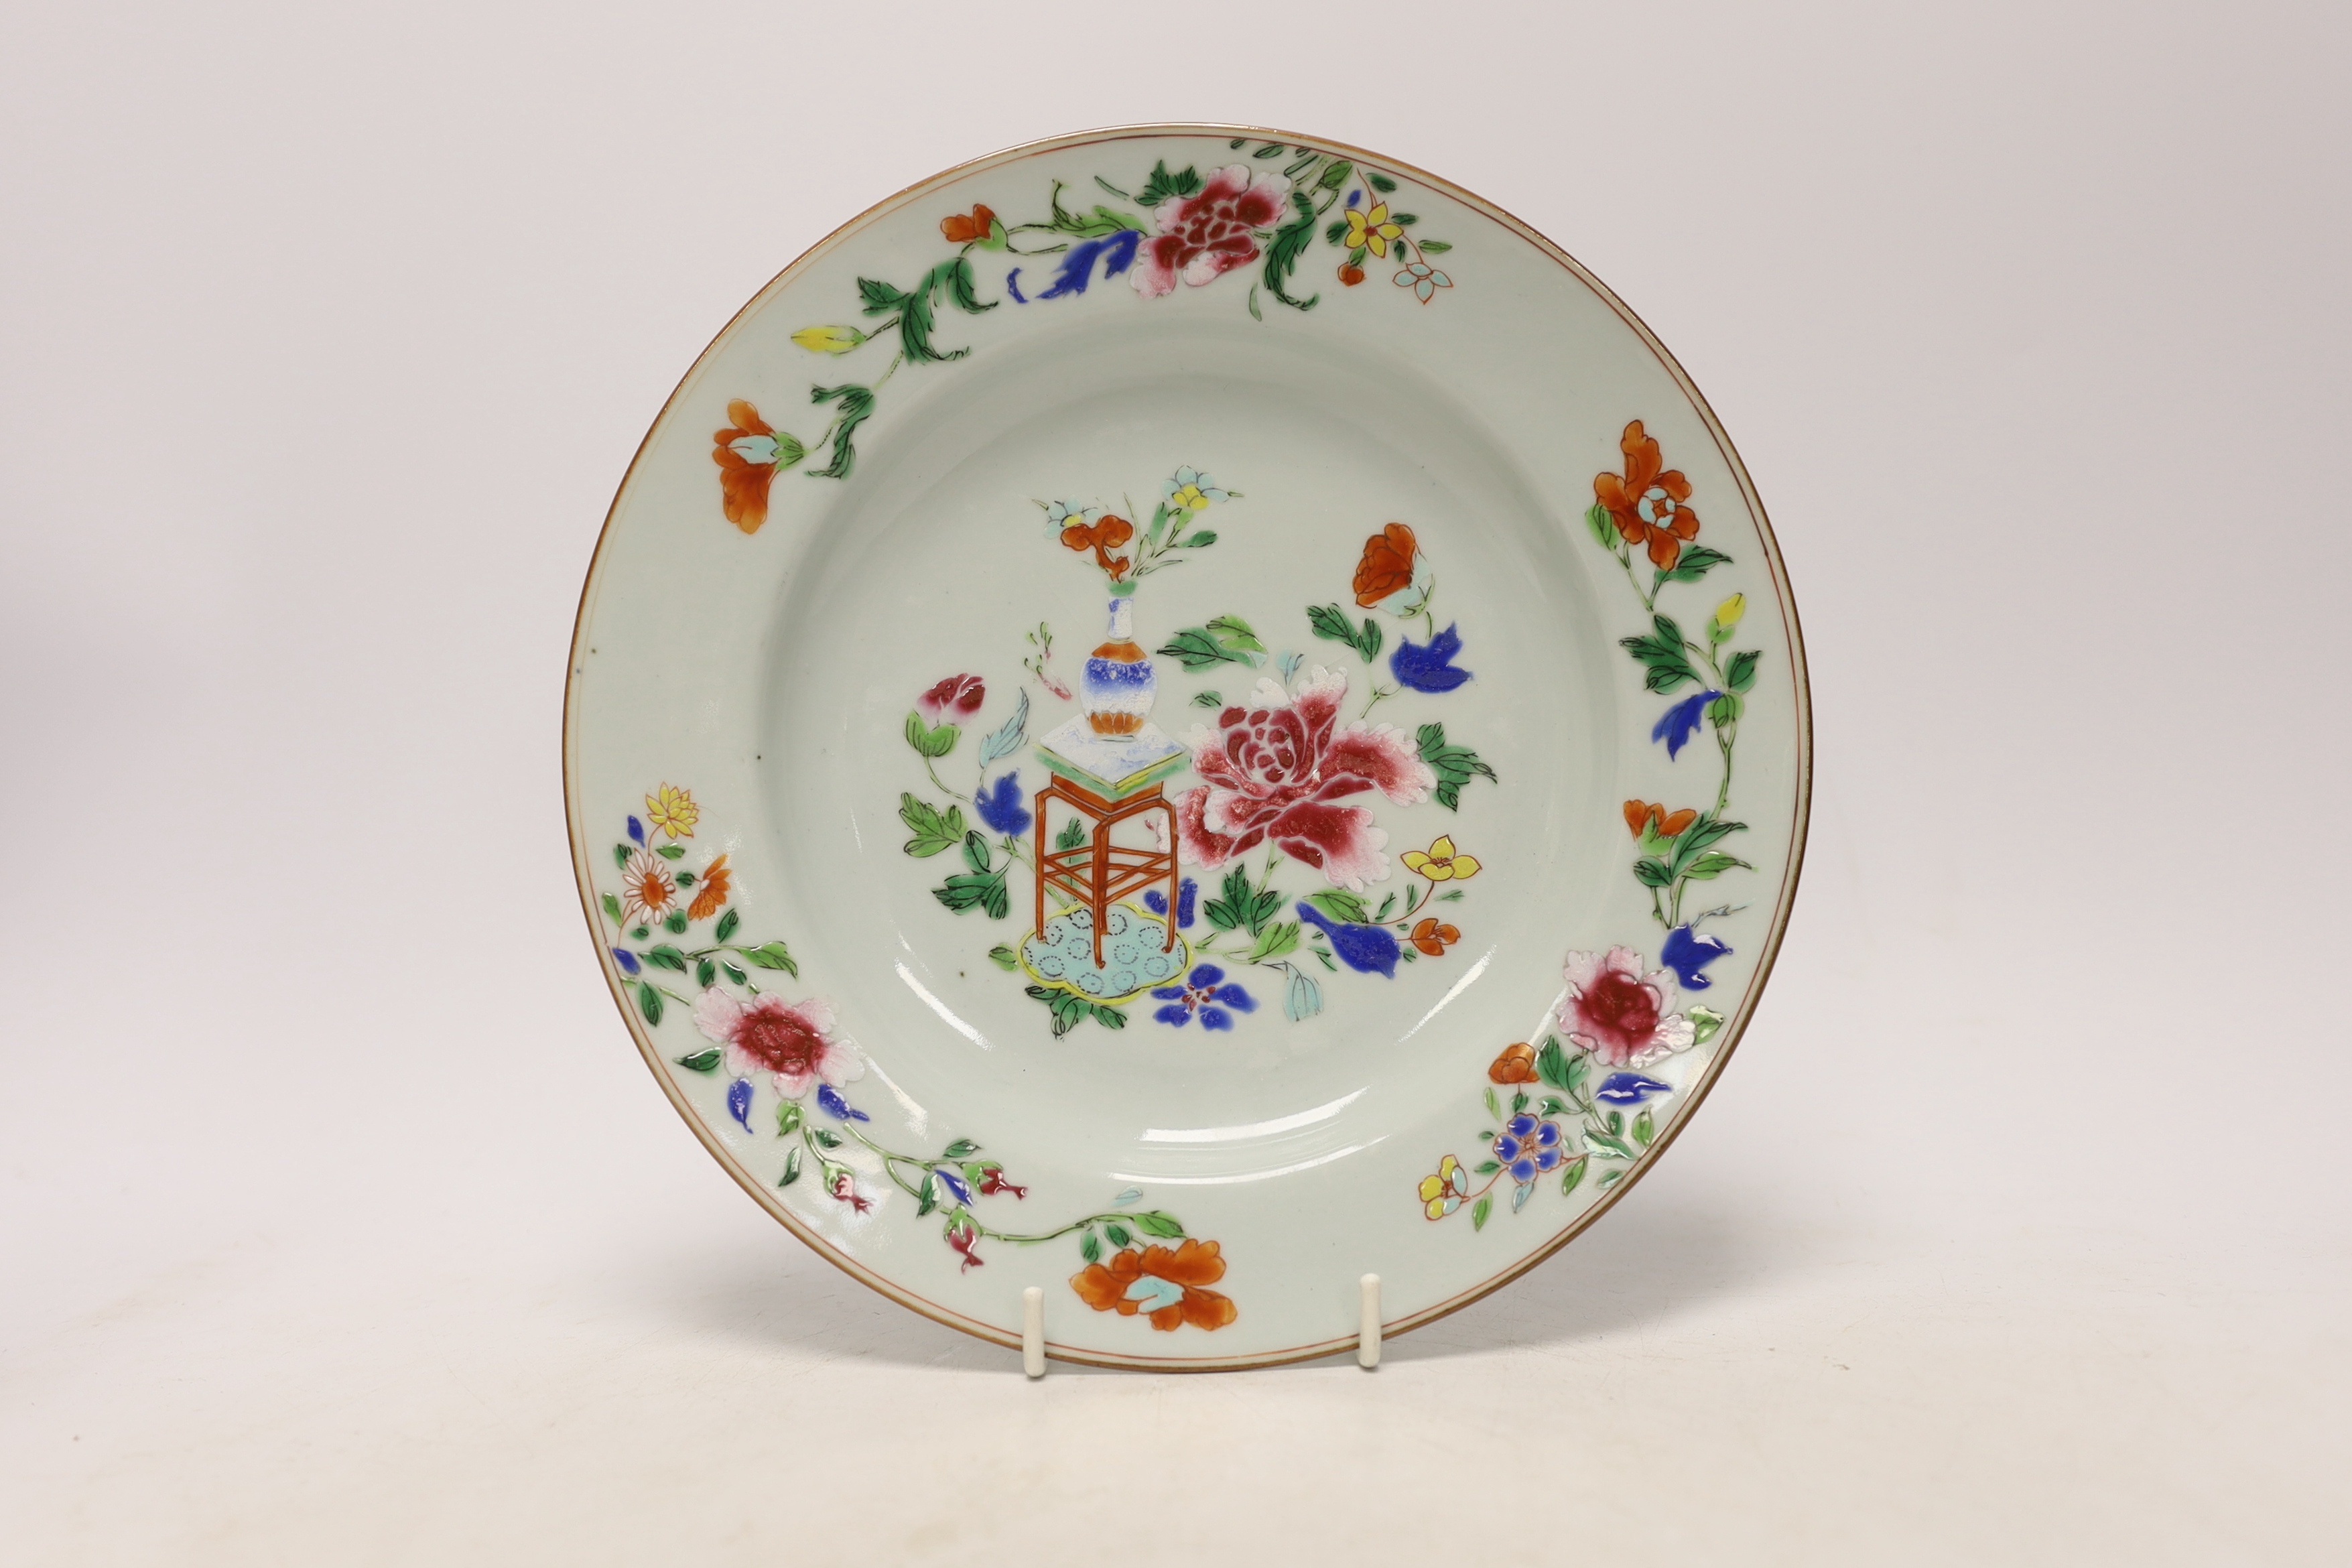 A late 18th century Chinese famille rose plate and a 19th century famille rose plate, largest 24.5cm in diameter